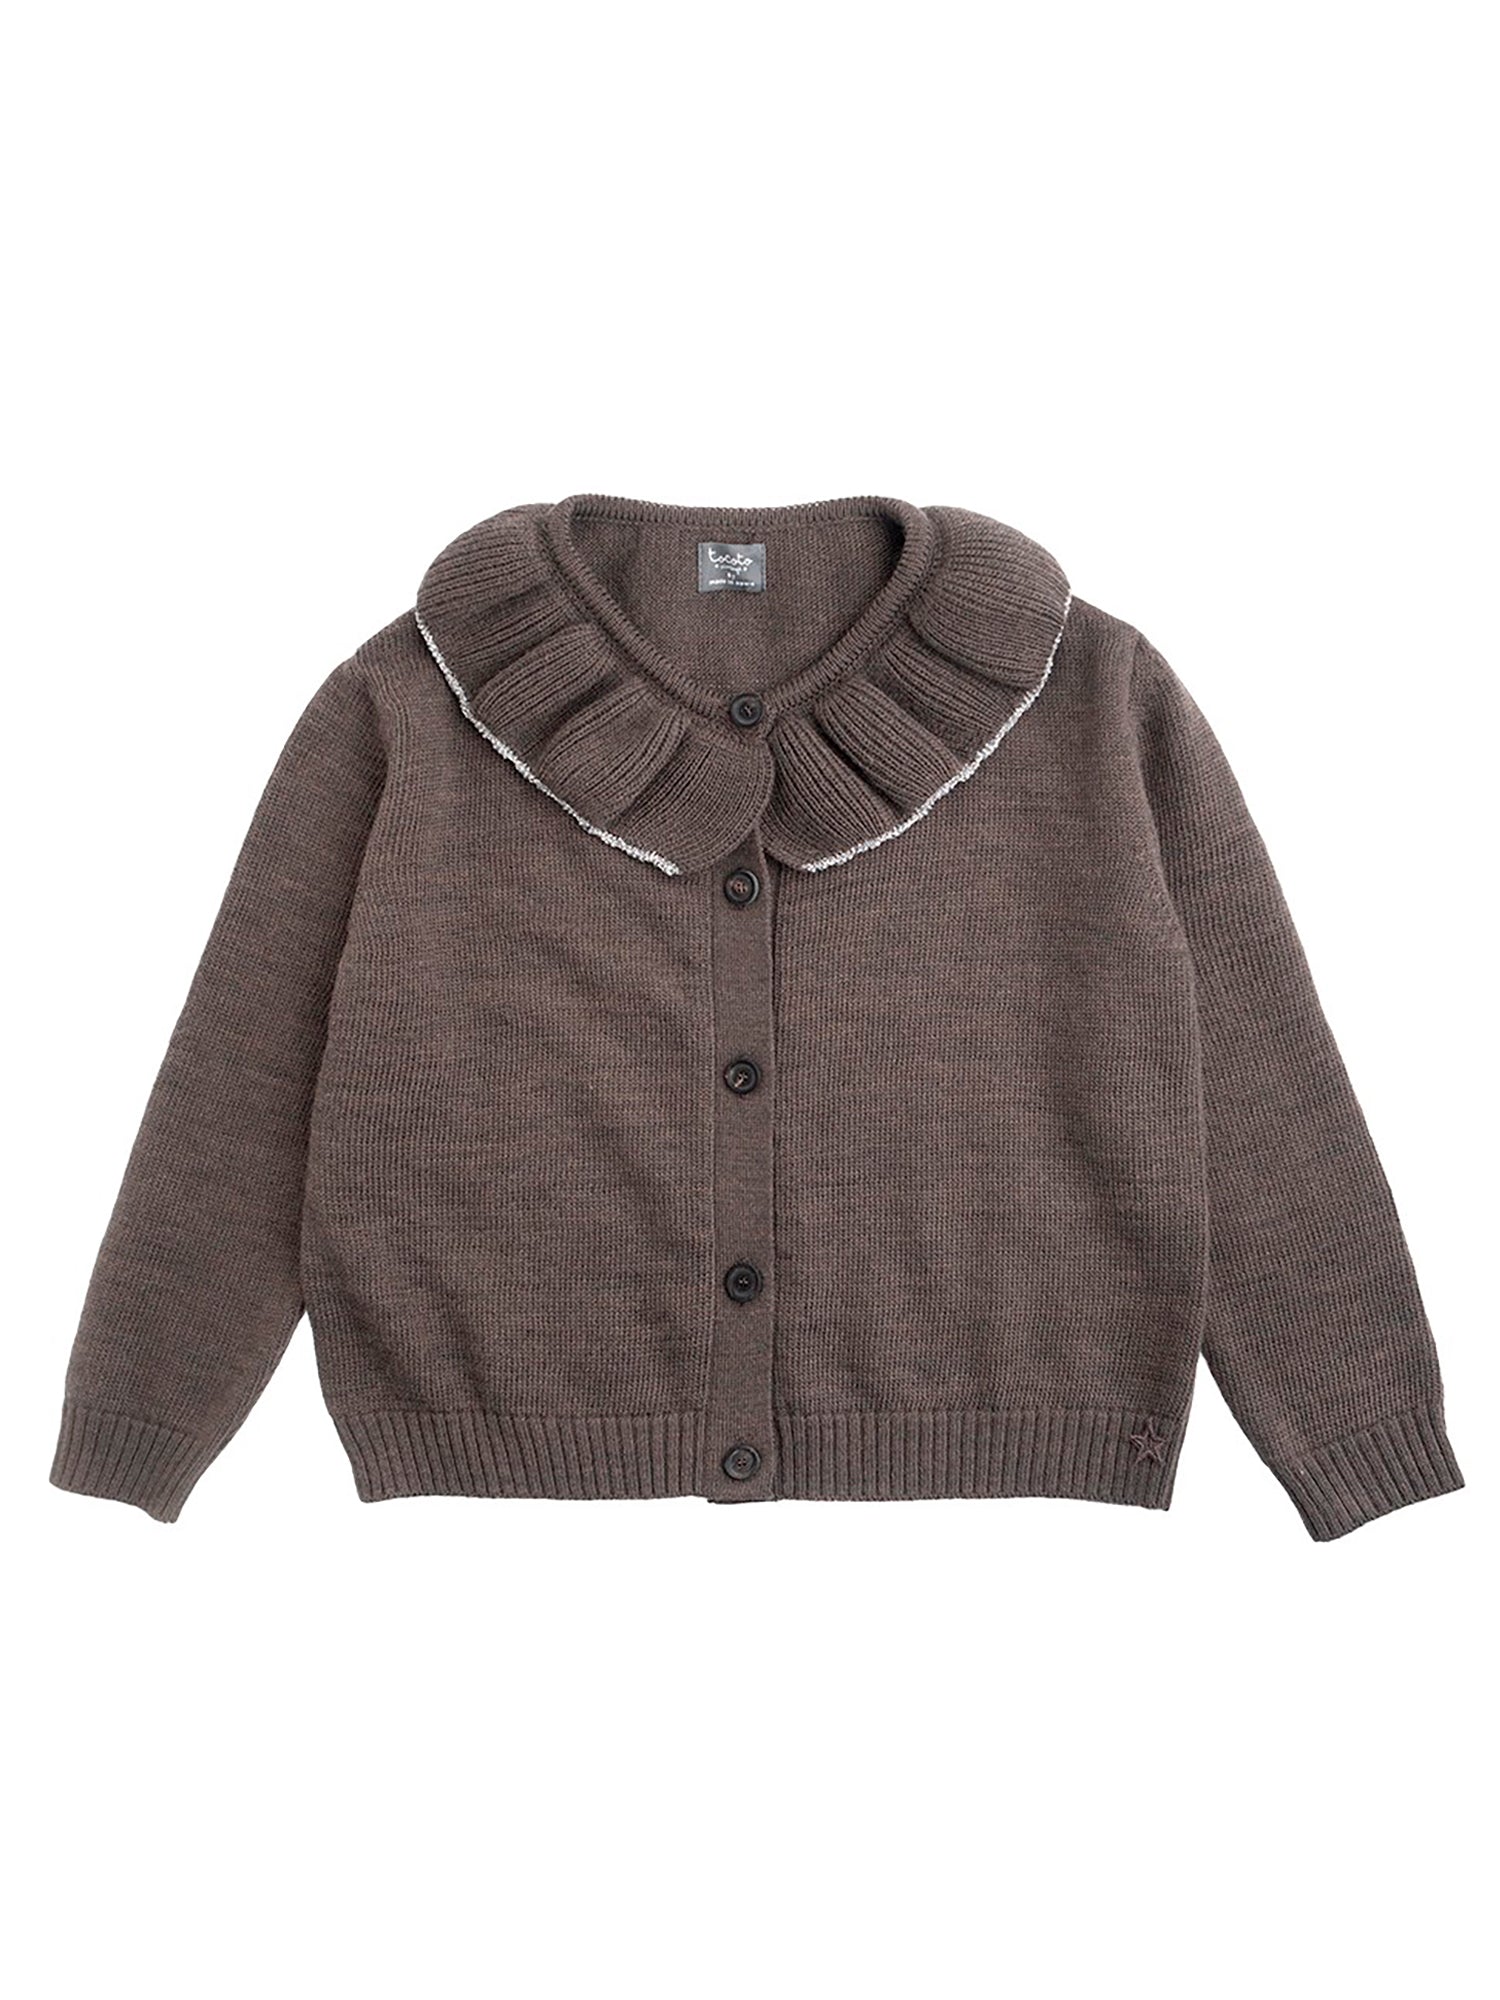 tocoto vintage Knitted cardigan darkgray